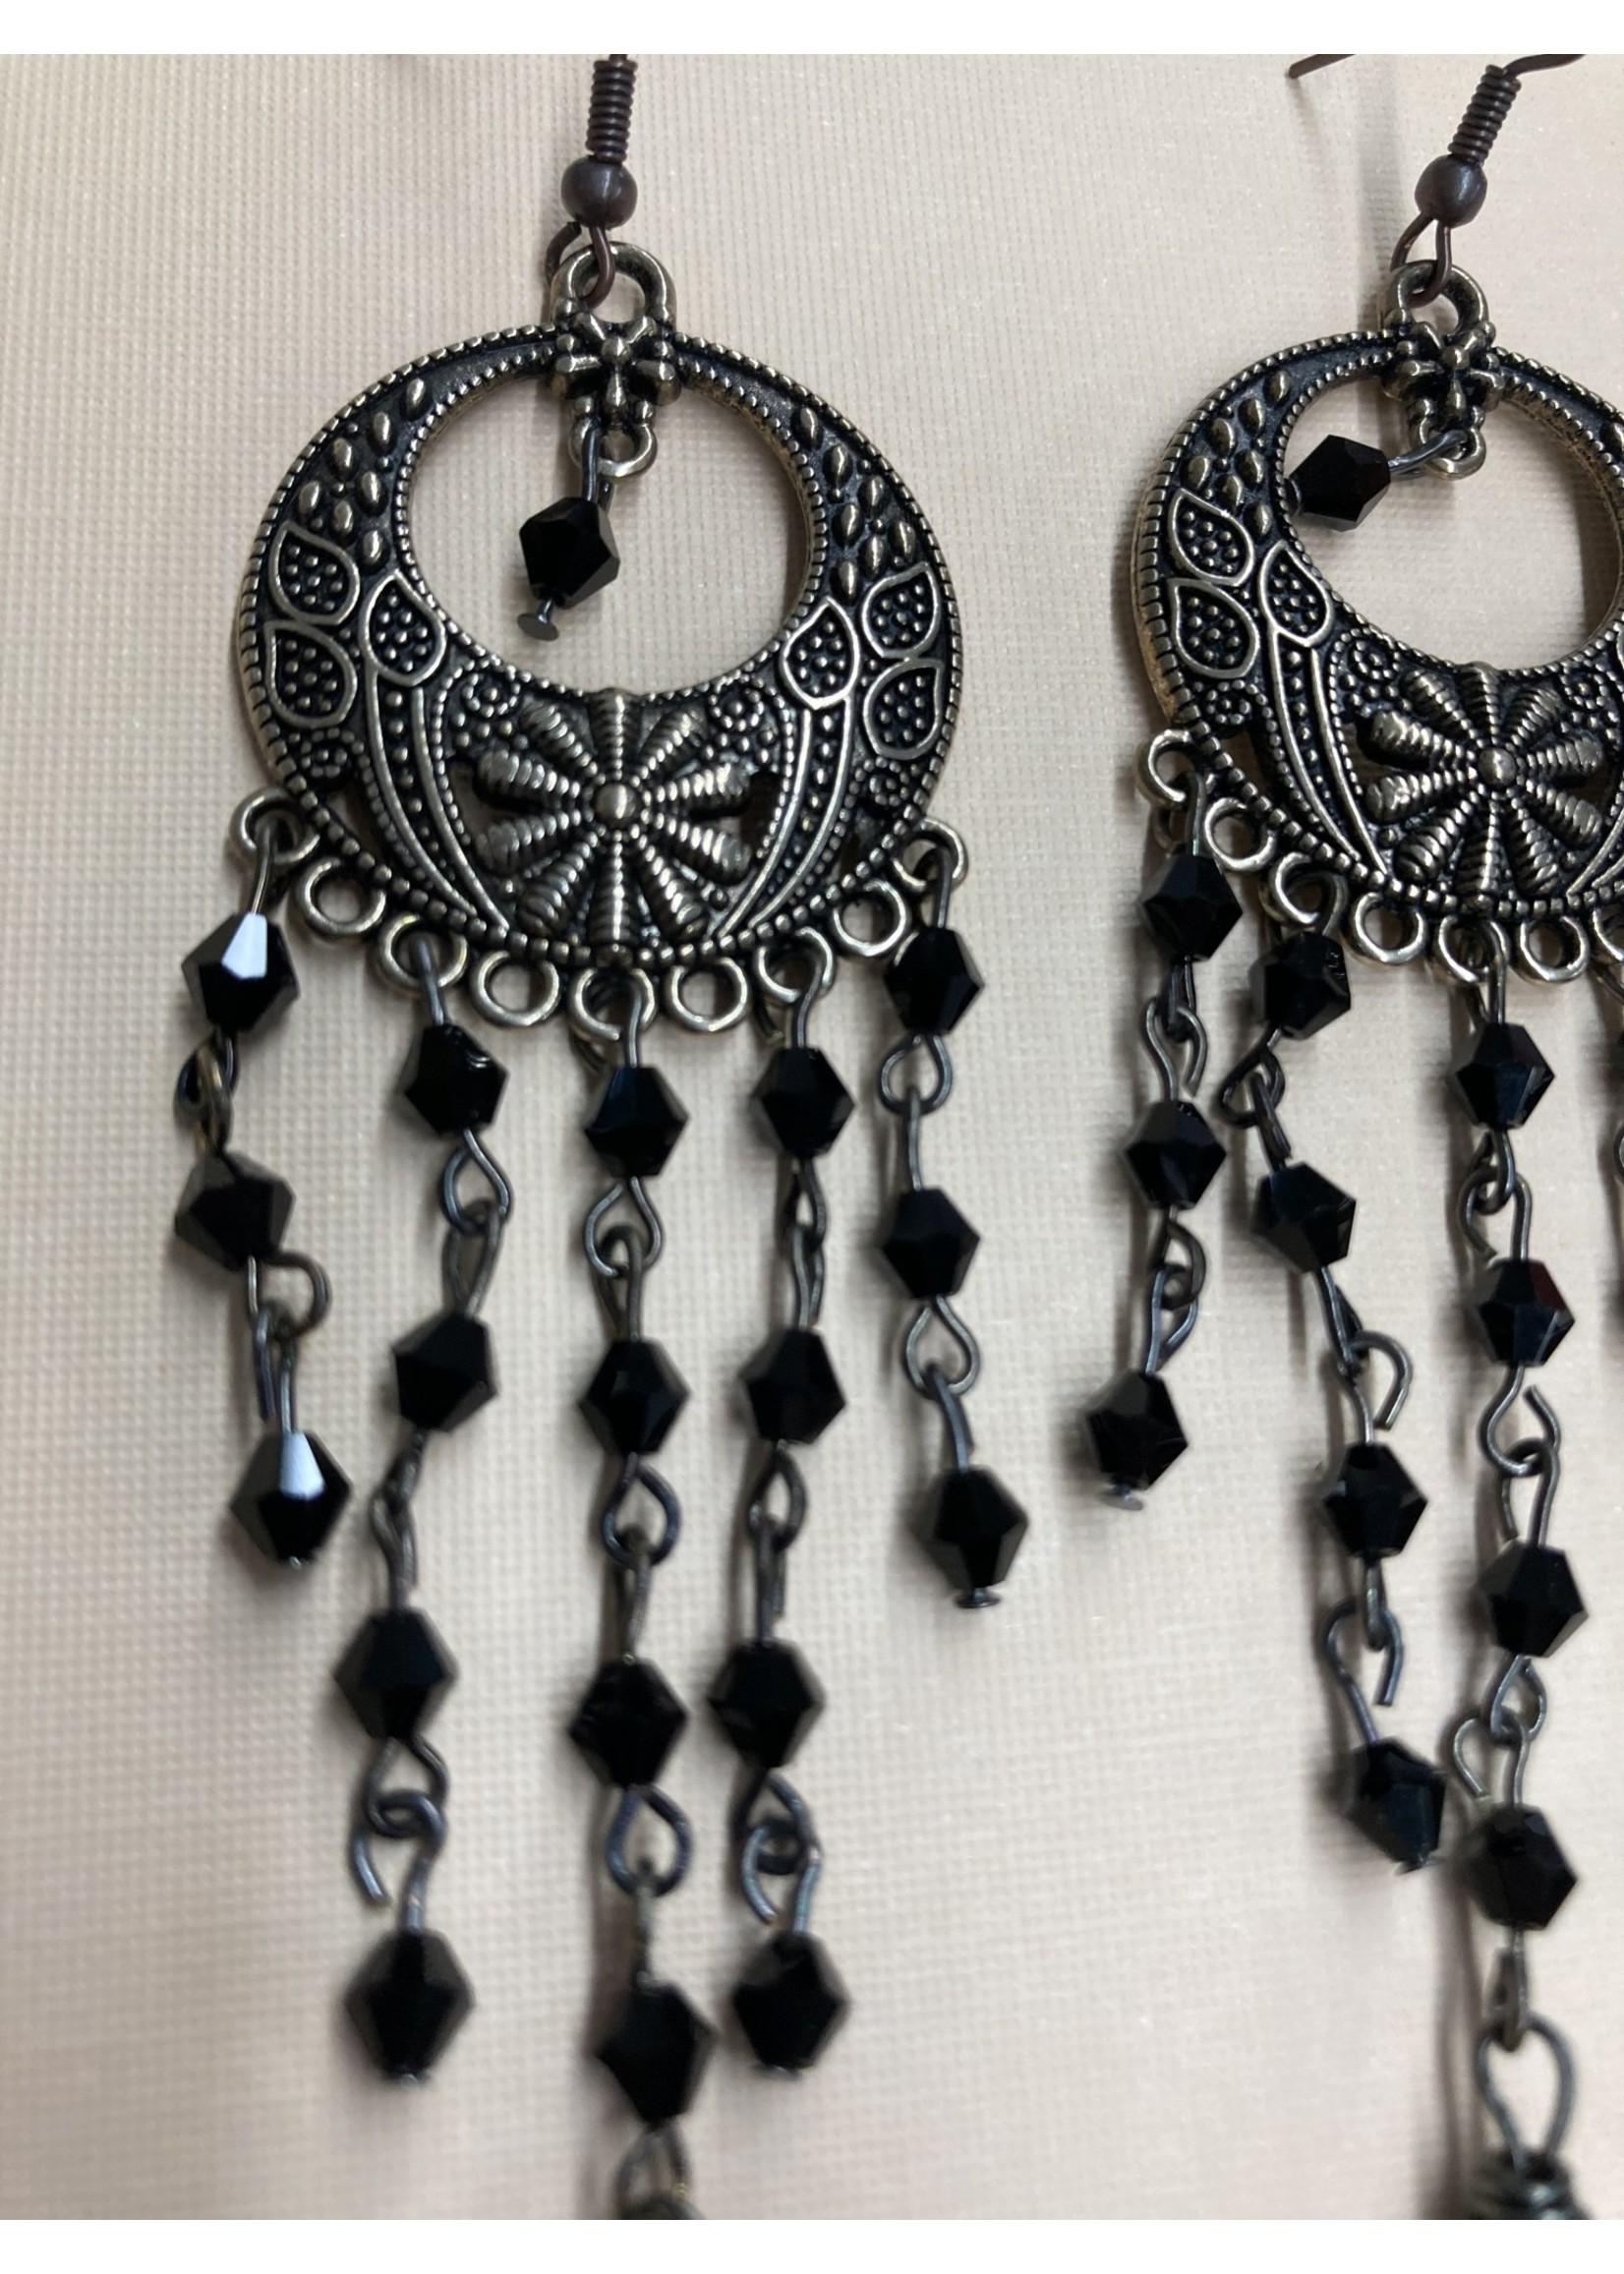 Our Twisted Dahlia E027 Filigree Metal Chandelier with Black Crystal Earrings